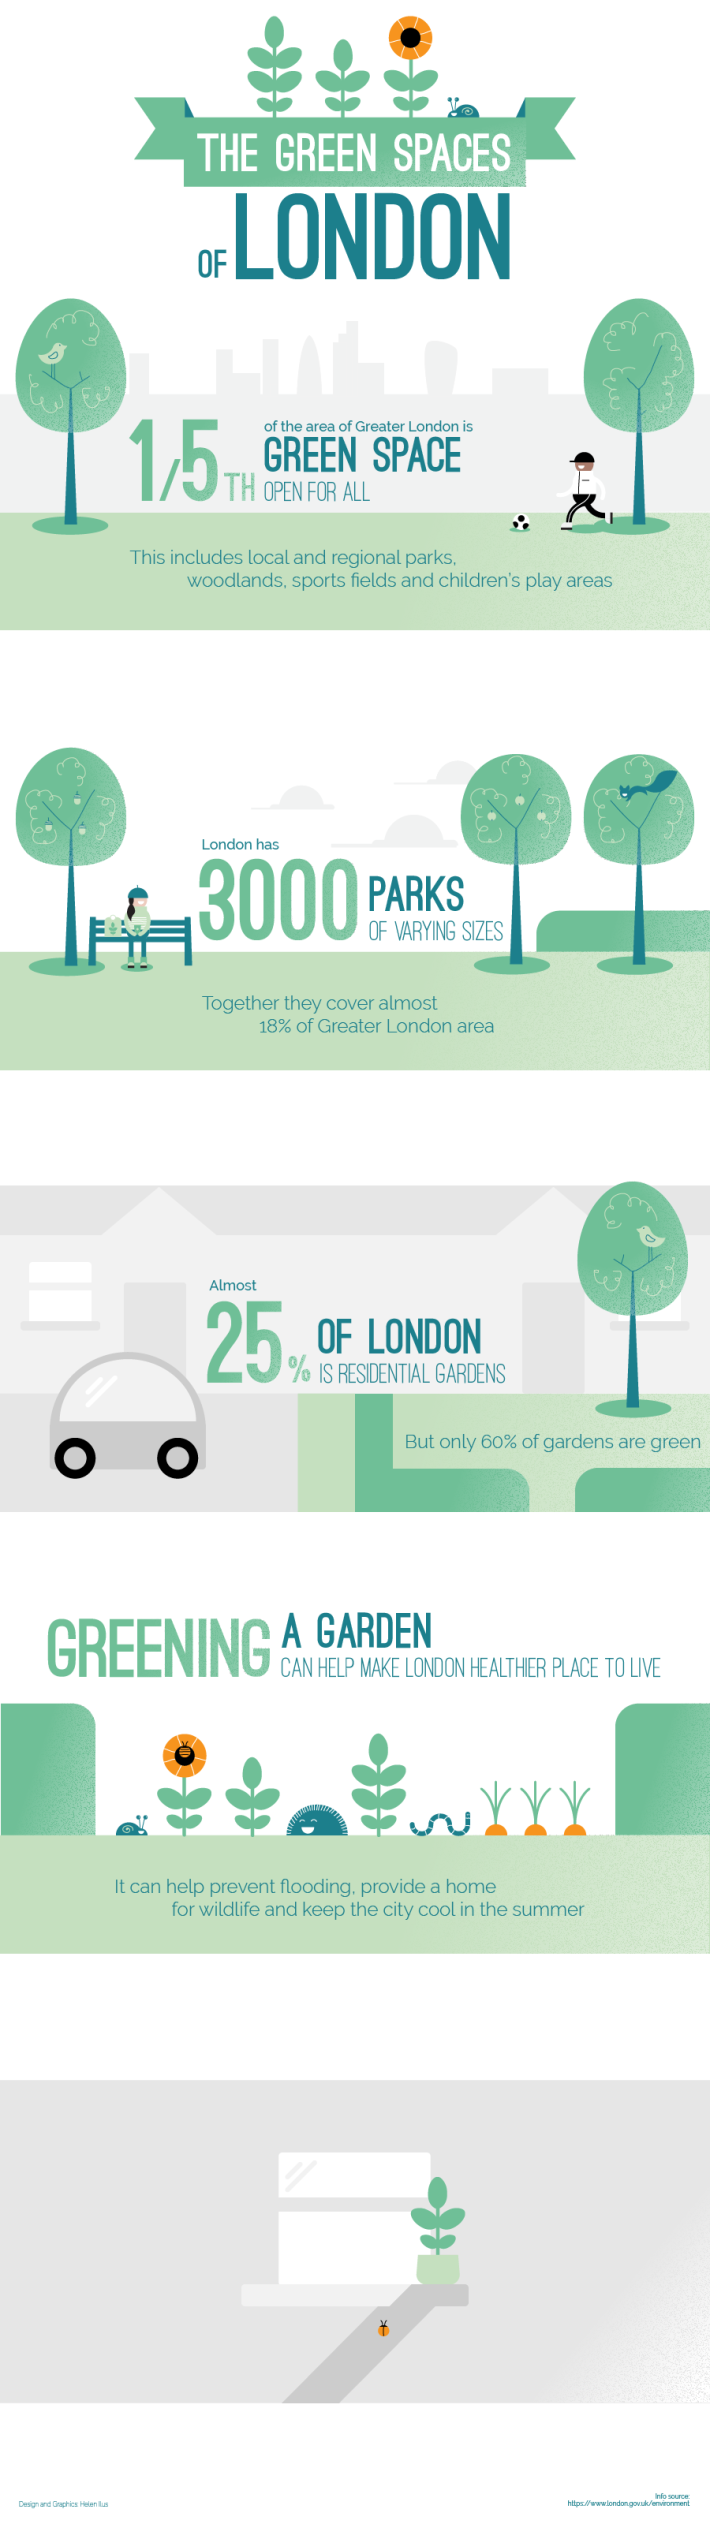 The Green Spaces of London